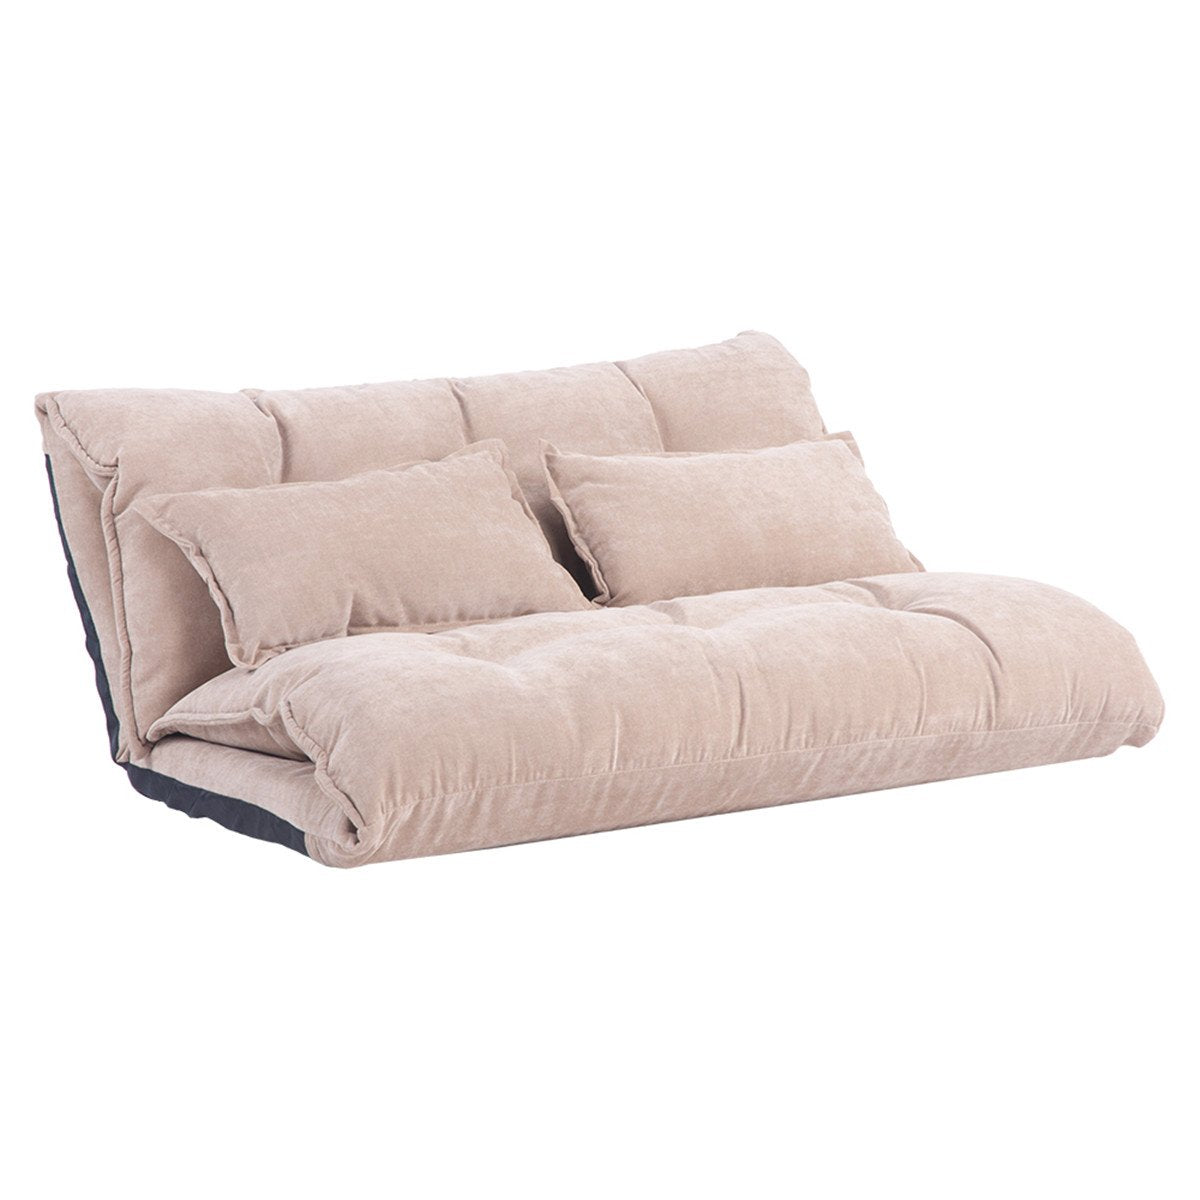 Adjustable Foldable Modern Leisure Sofa Bed Video Gaming Sofa with Two Pillows